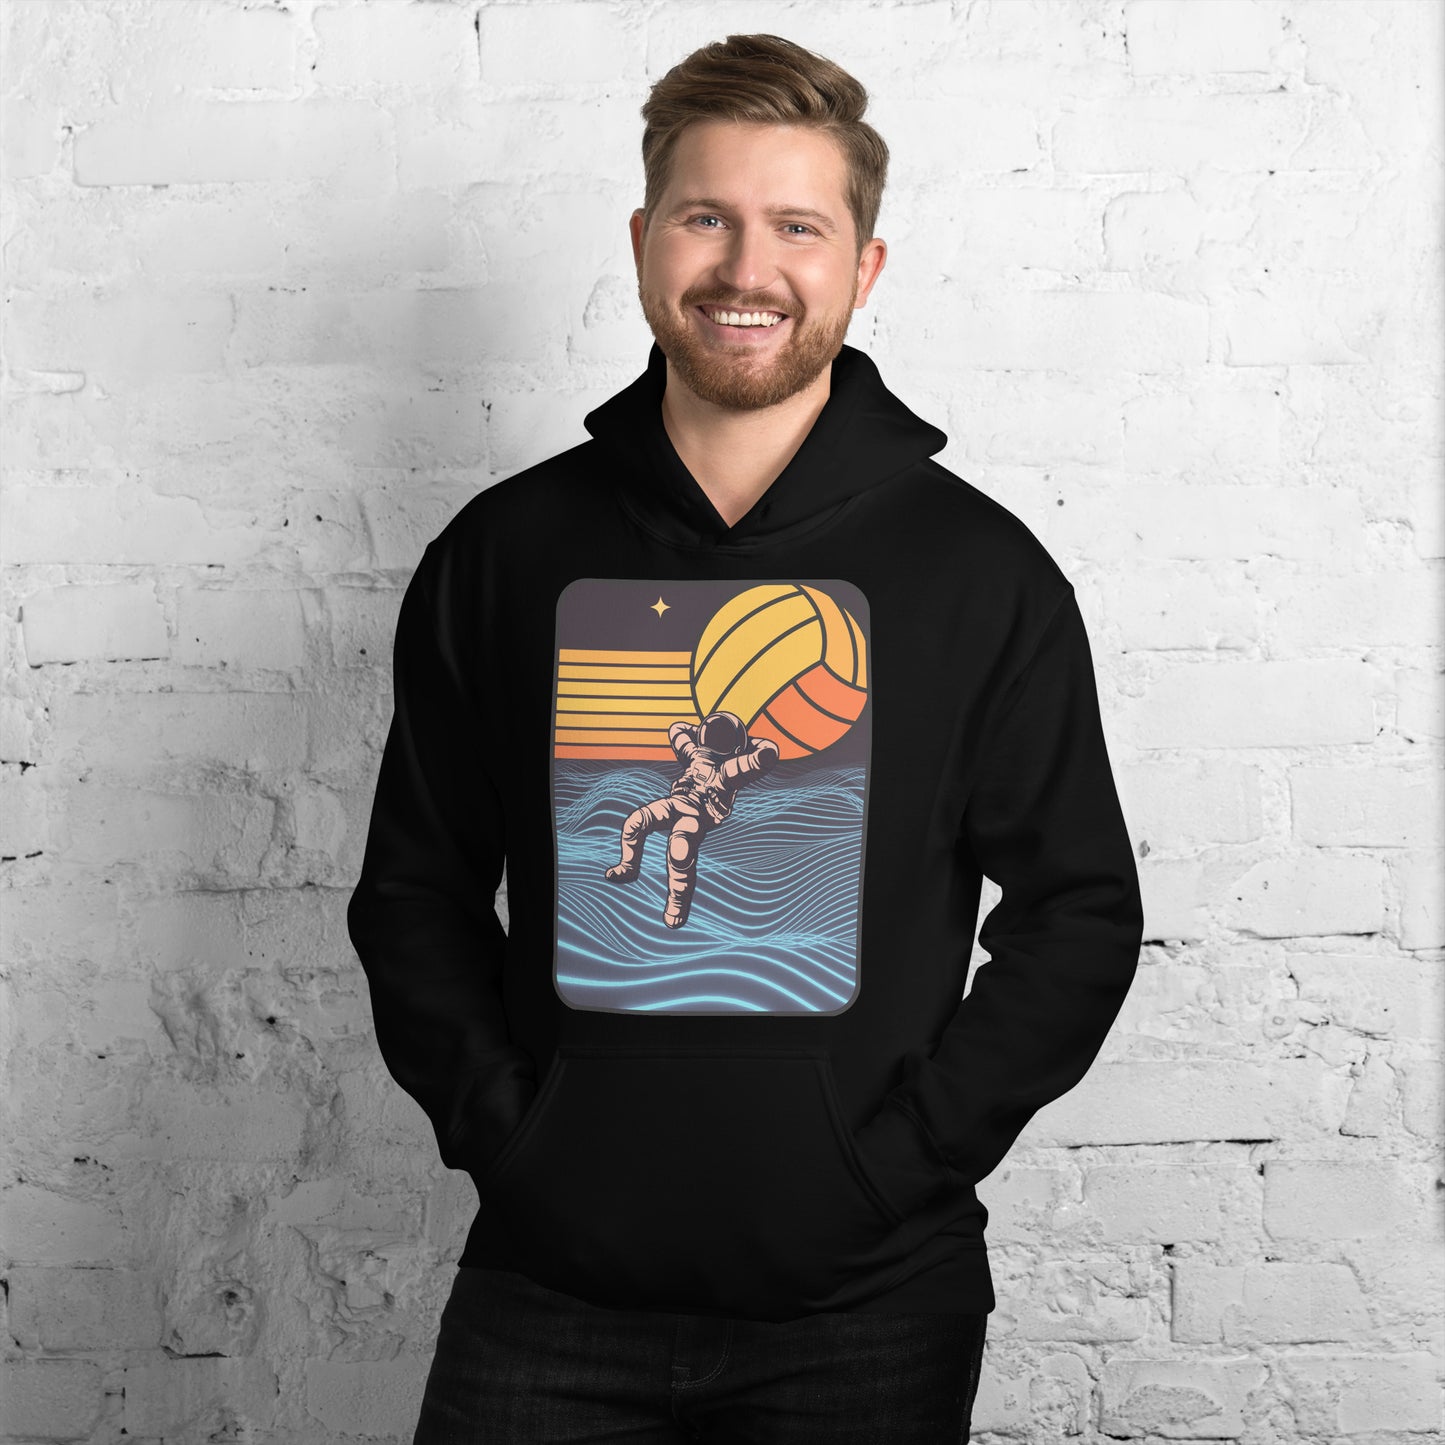 My Water Polo Game is out of this World - Unisex Heavy Blend Hoodie - Gildan 18500